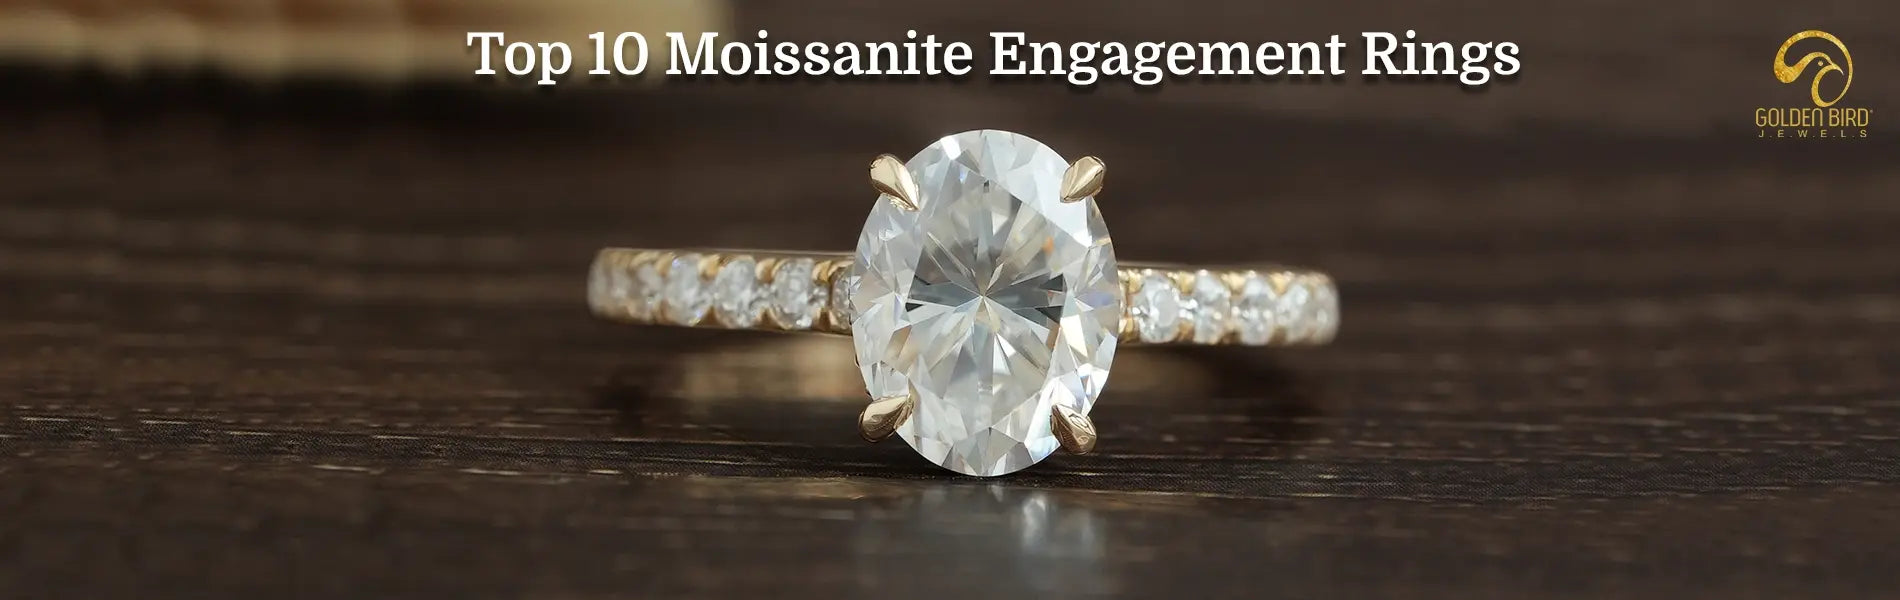 Best 10 Moissanite Earrings For Women That Suits Every Attires